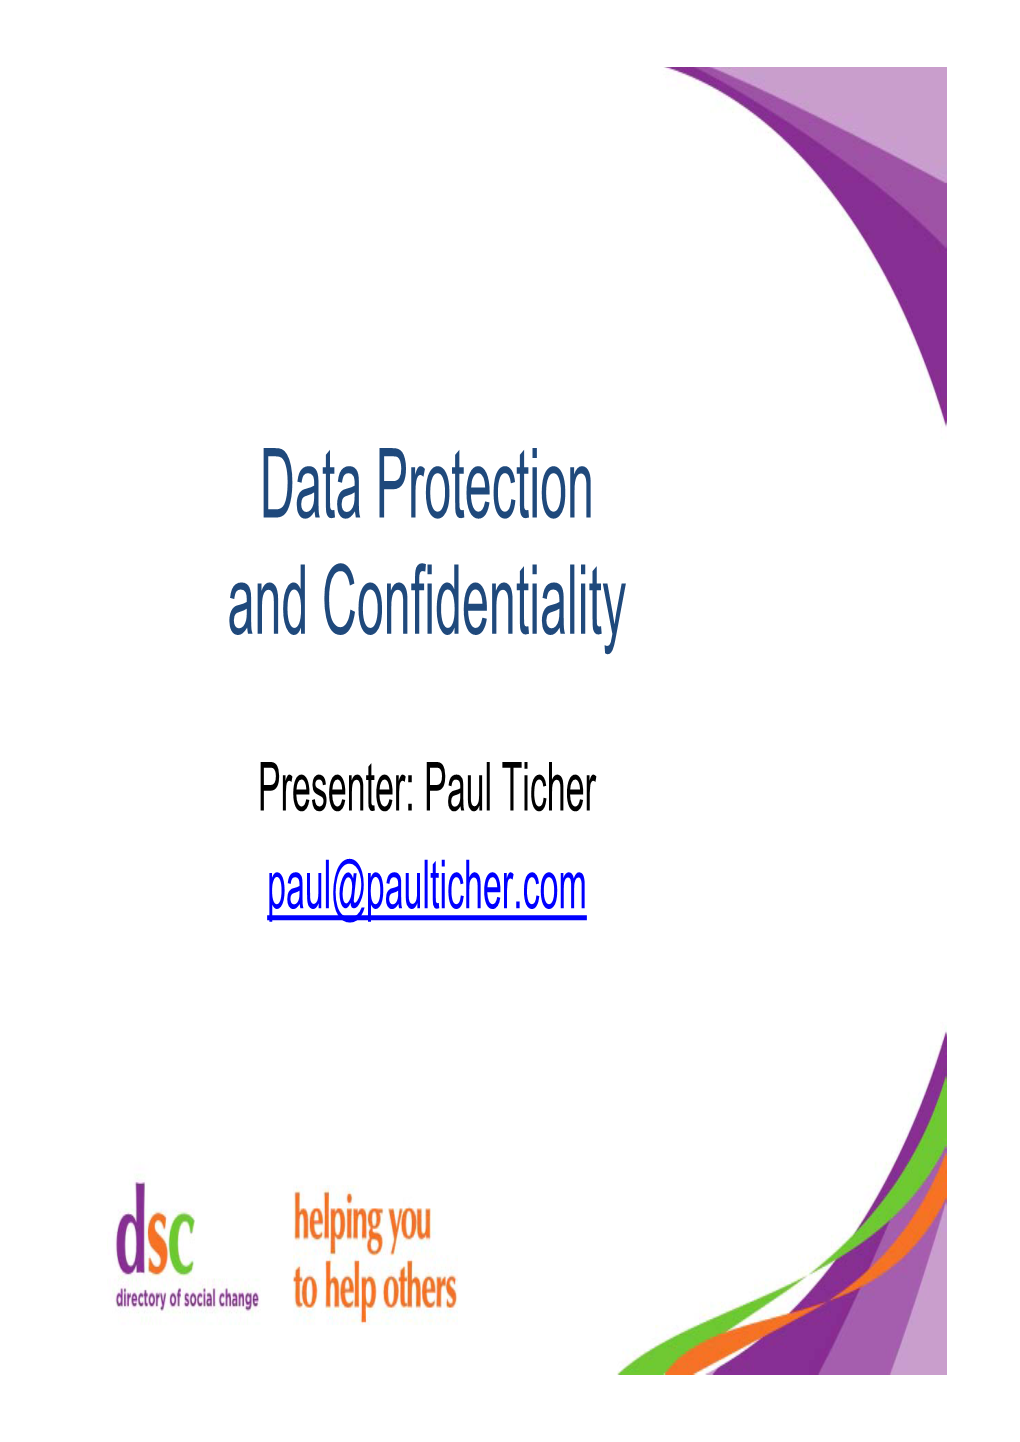 Data Protection and Confidentiality